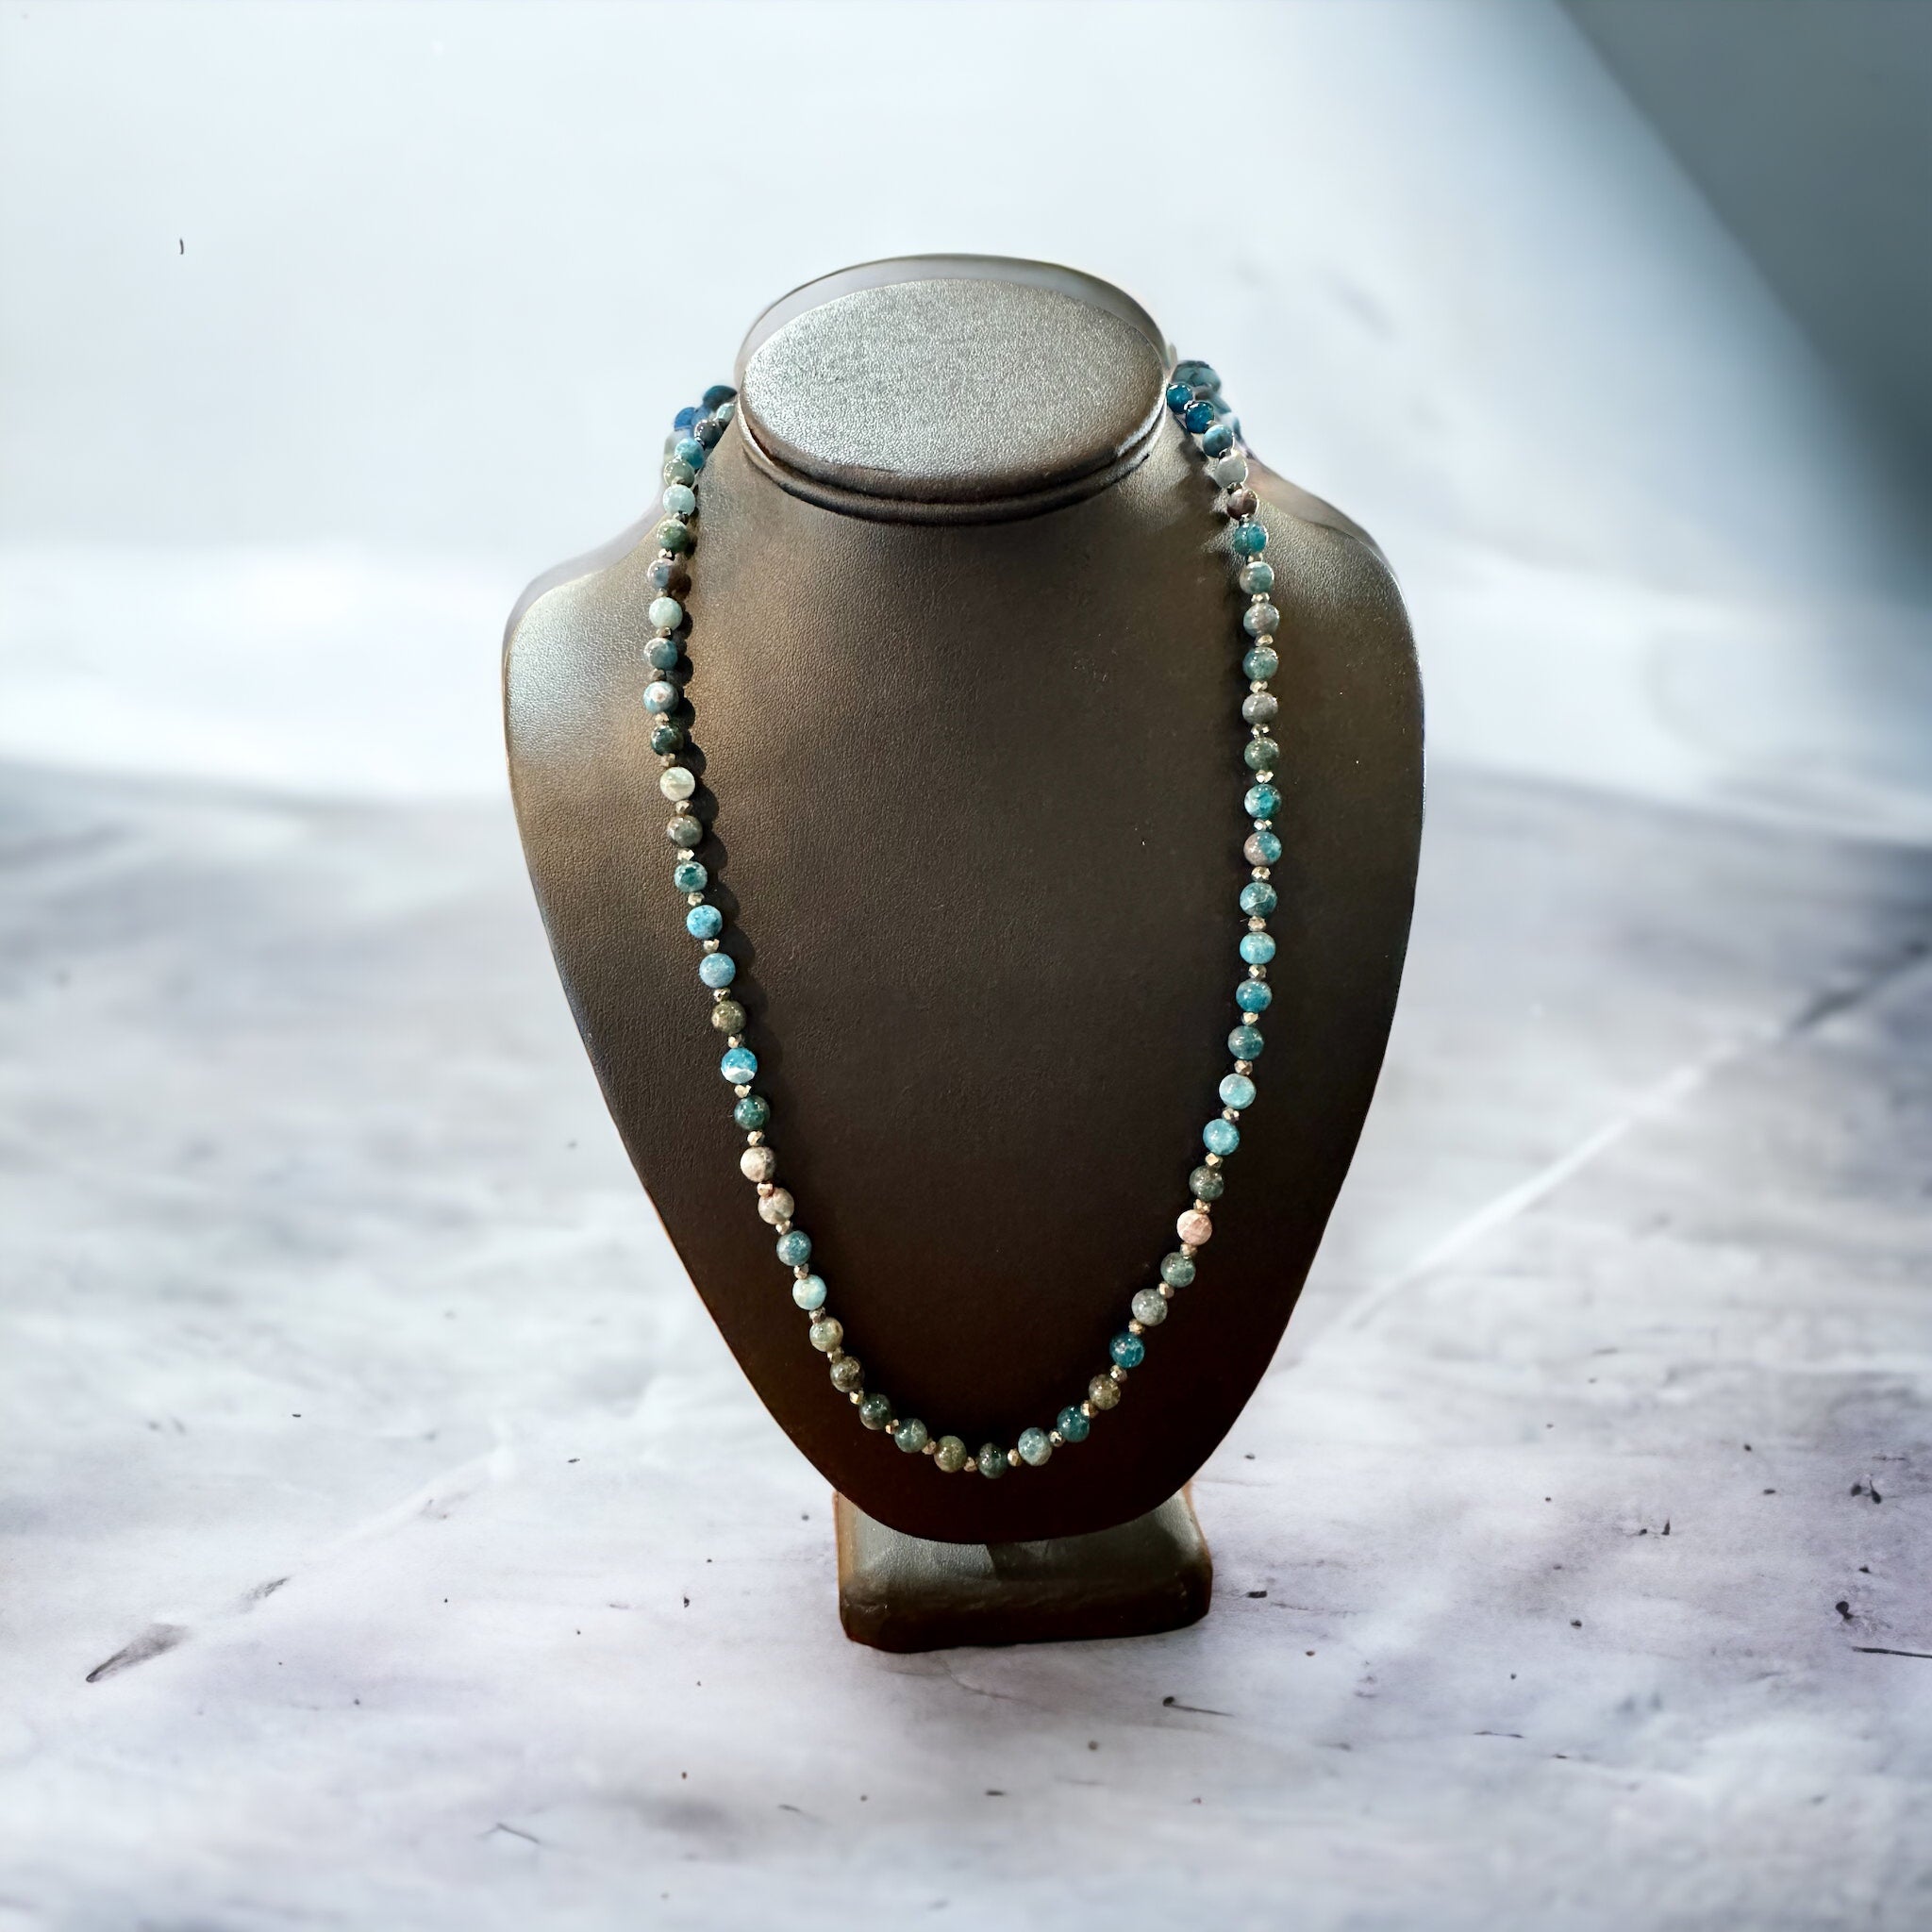 Fancy Beads - 6mm Apatite & Pyrite Necklace